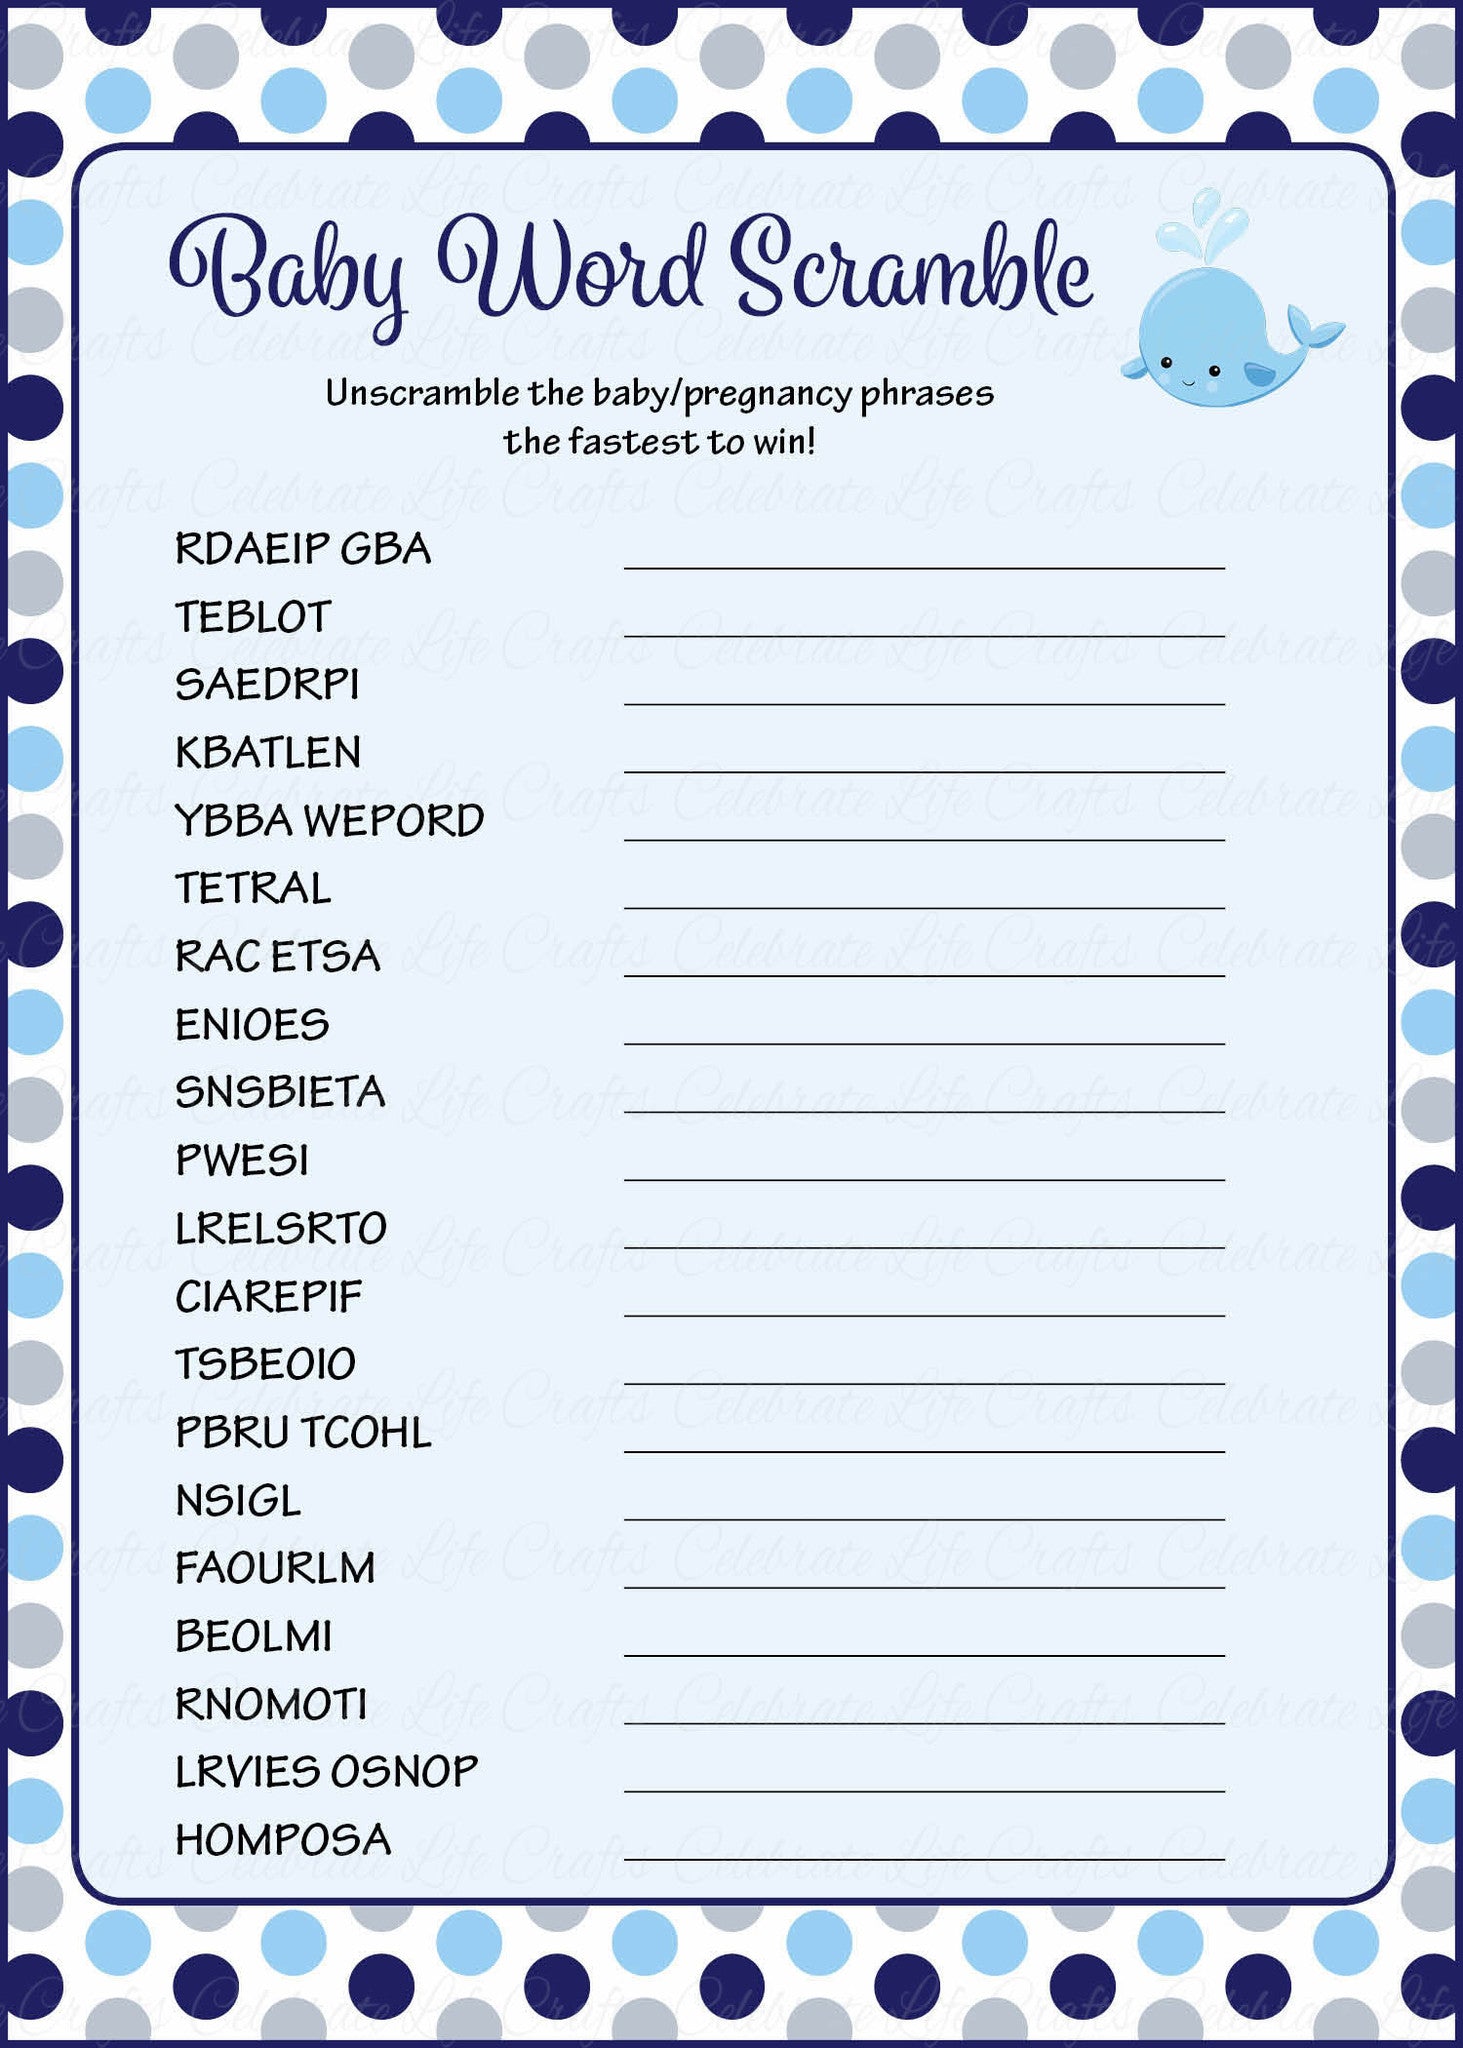 Word Scramble Baby Shower Game Whale Baby Shower Theme For Baby Boy